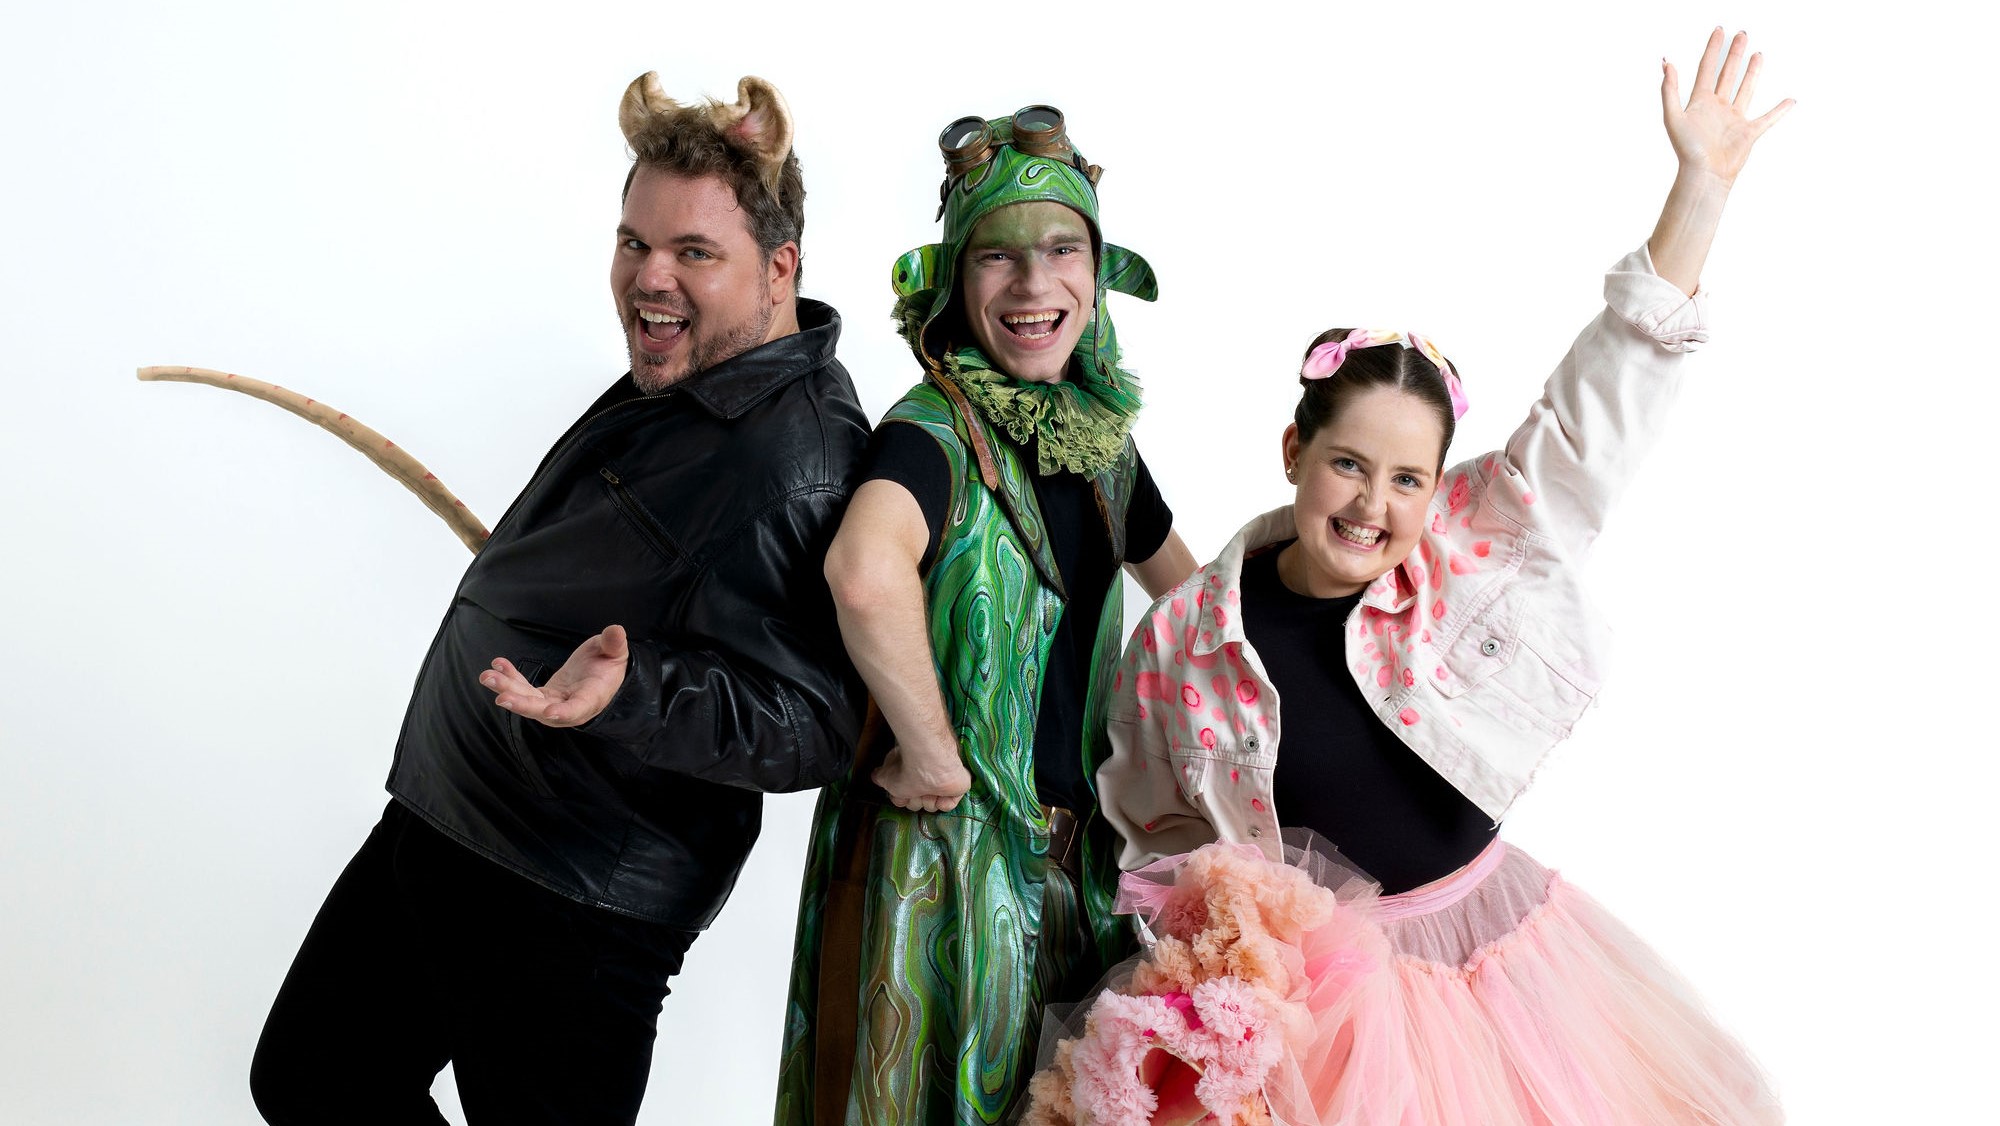 Meet our trio of young performers in The Frog Prince